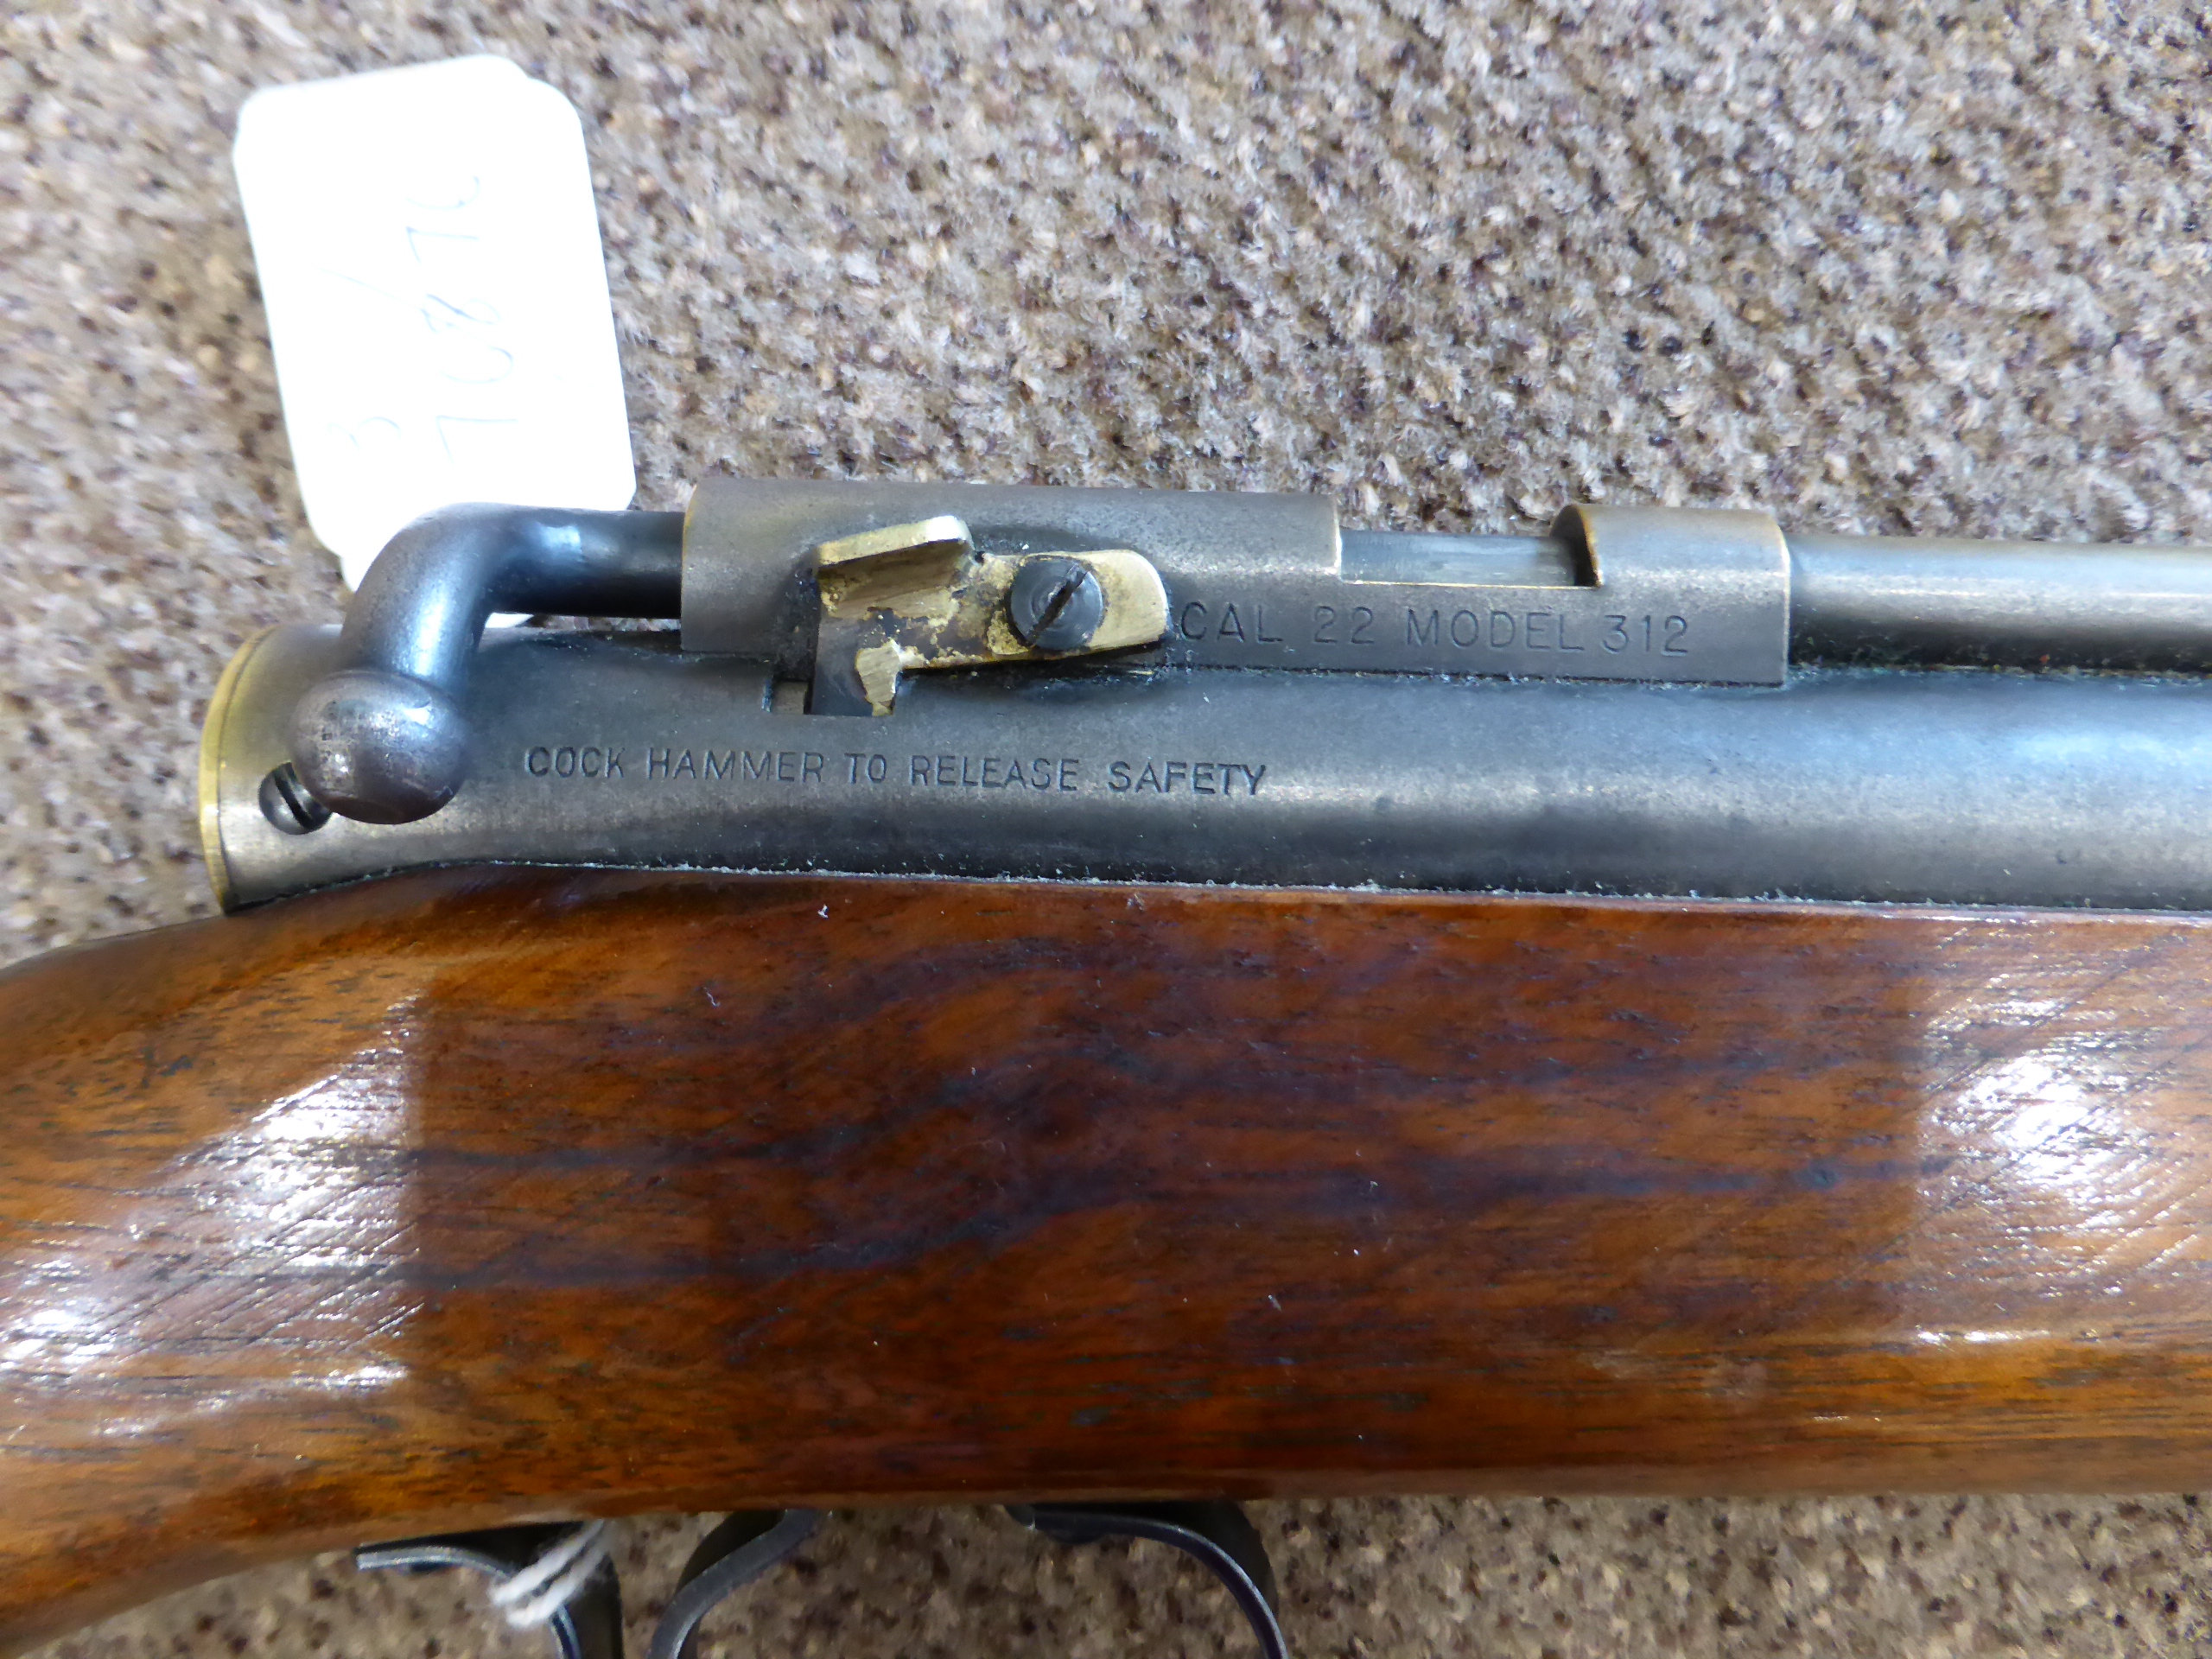 PURCHASER MUST BE 18 YEARS OR OVER A Benjamin Franklin Model 312 Pump Action Air Rifle in .22 - Image 7 of 14